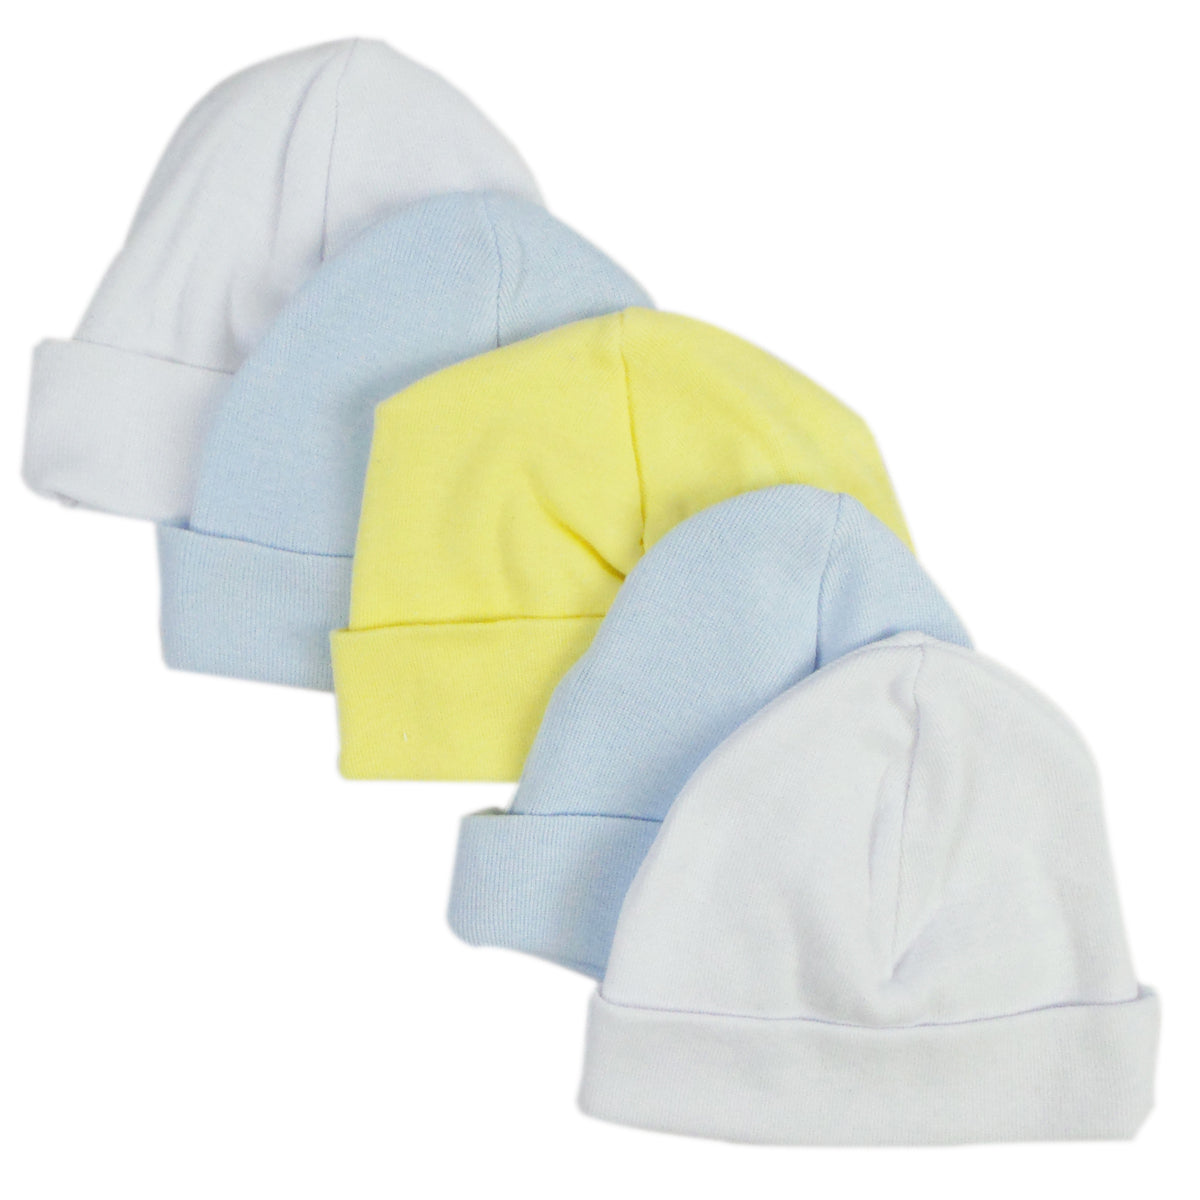 Blue & White Baby Caps (Pack of 5)